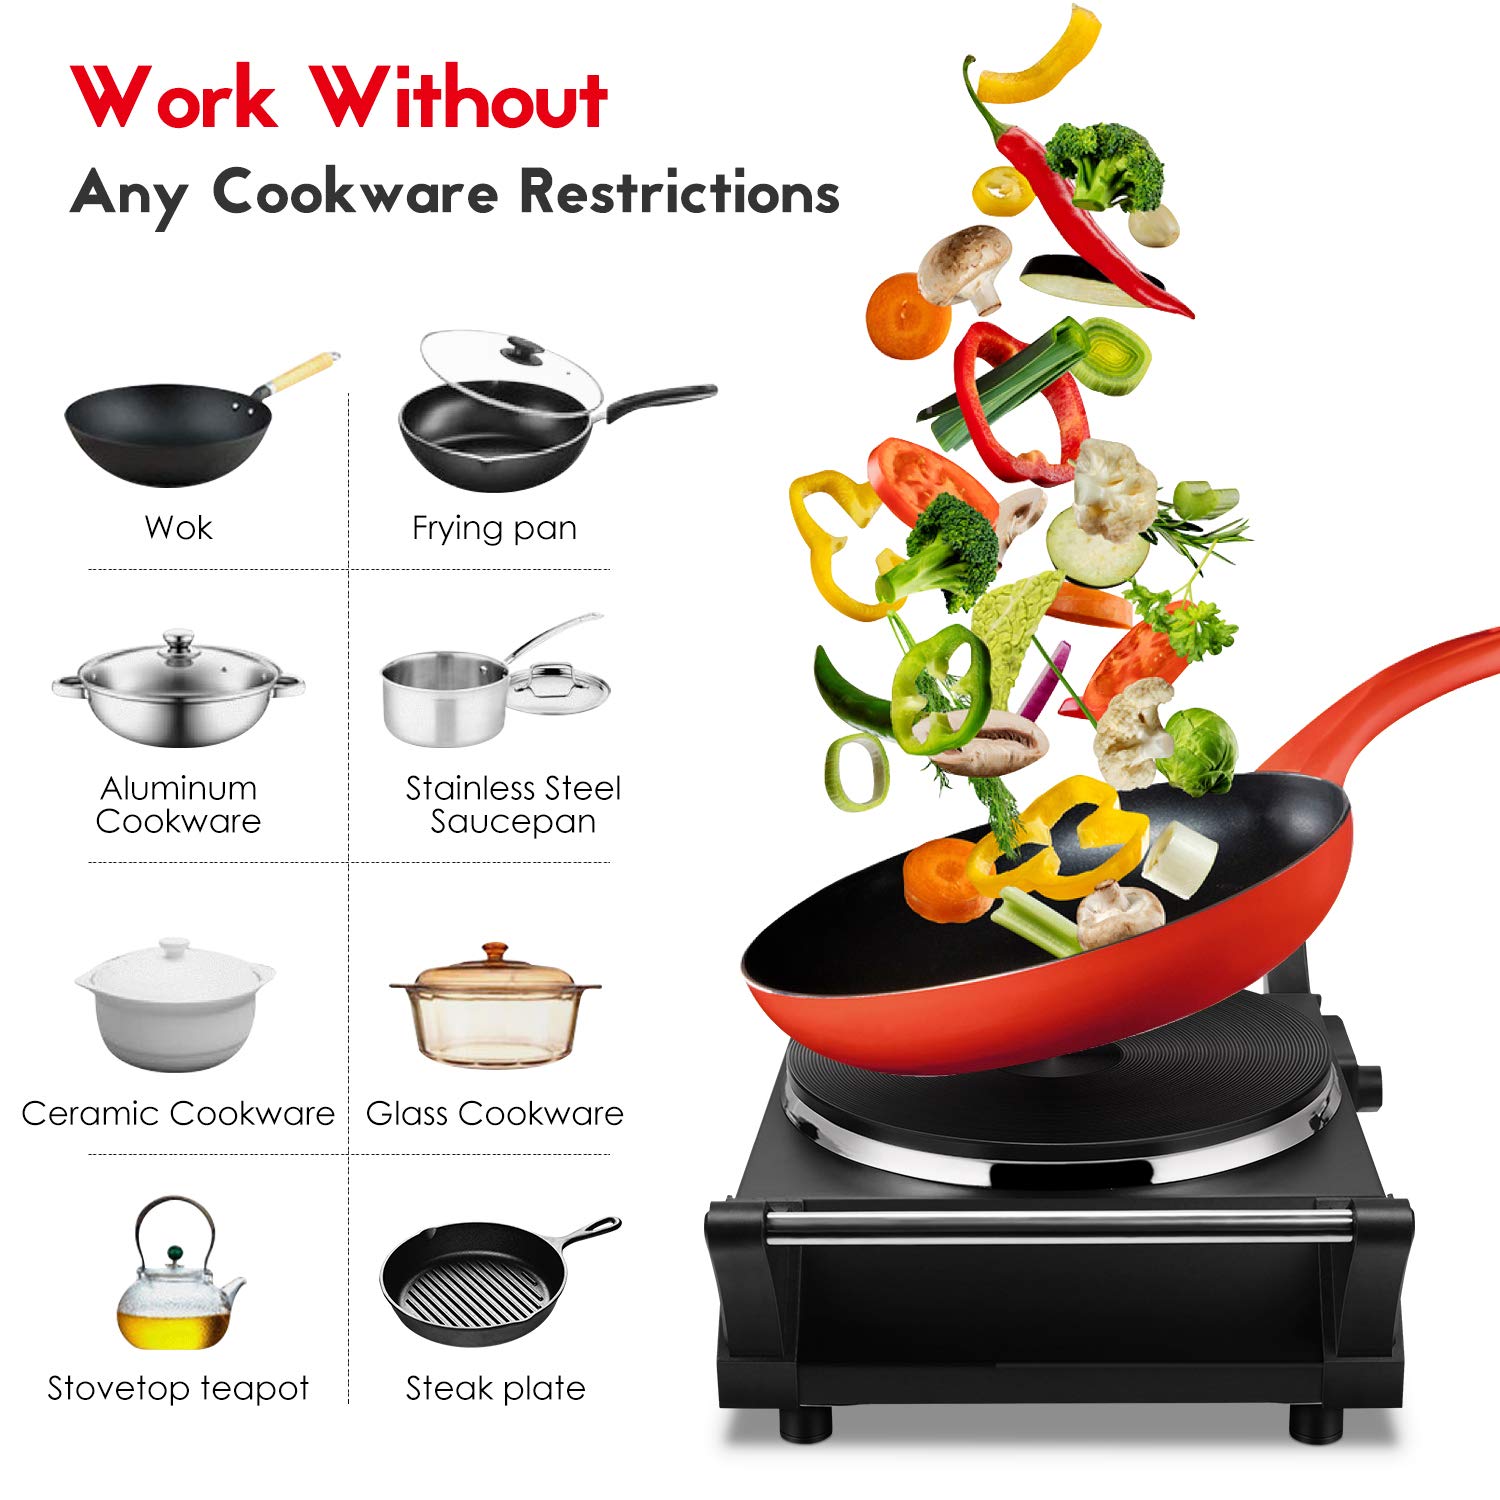 Techwood Hot Plate Electric Stove Single Burner Countertop Infrared Ceramic  Cooktop, 1500W Timer and Touch Control